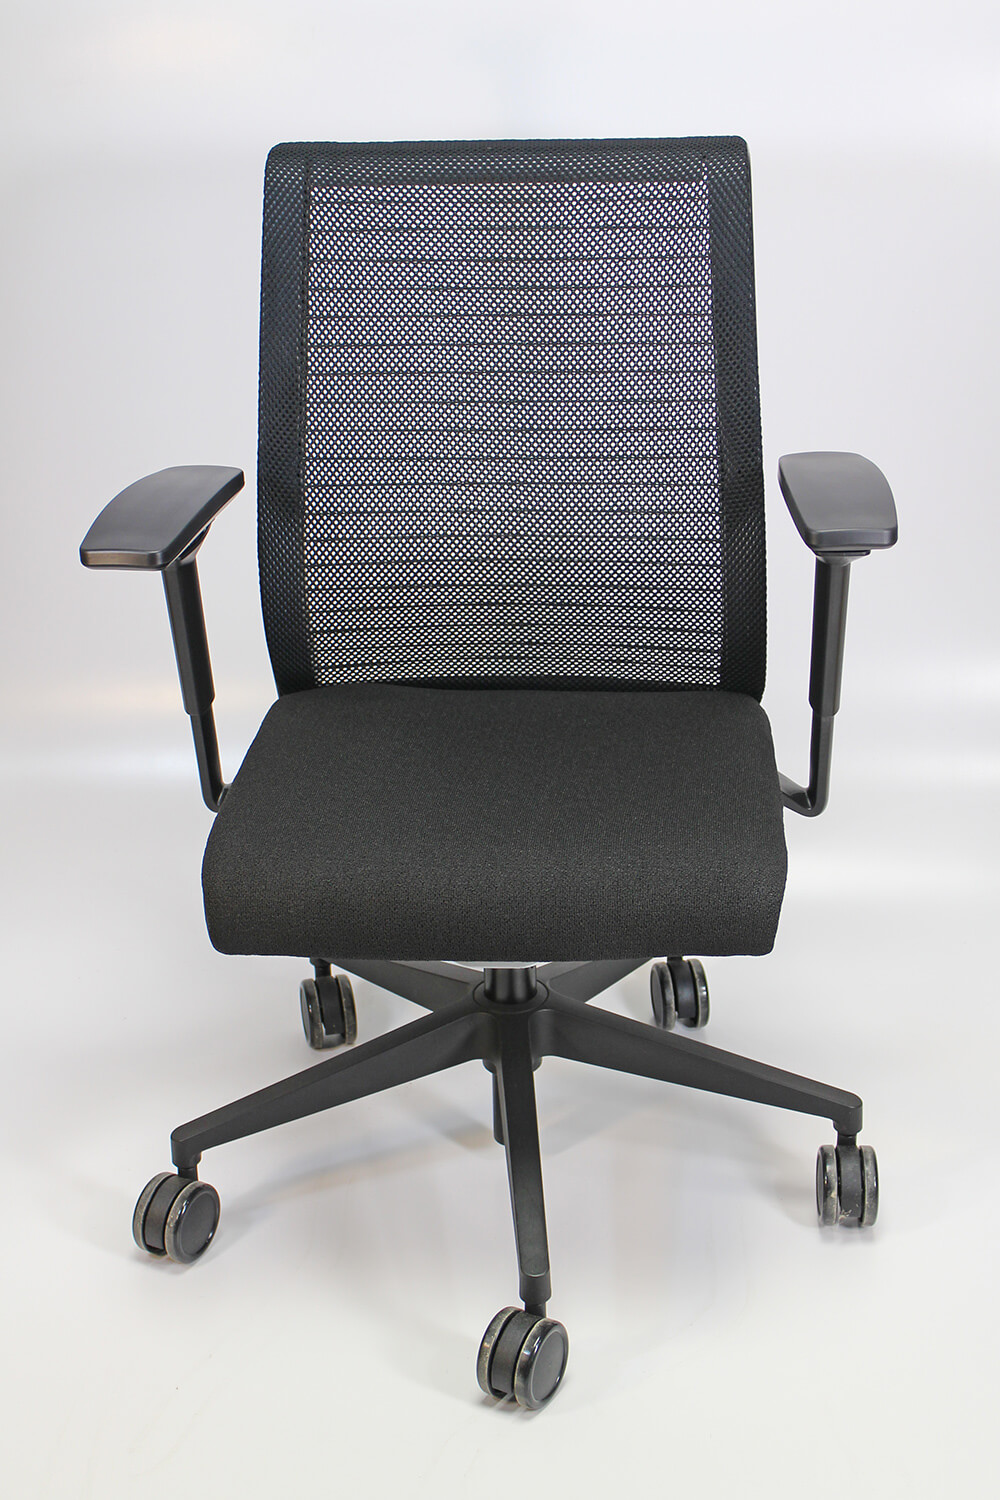 Steelcase think chair front view